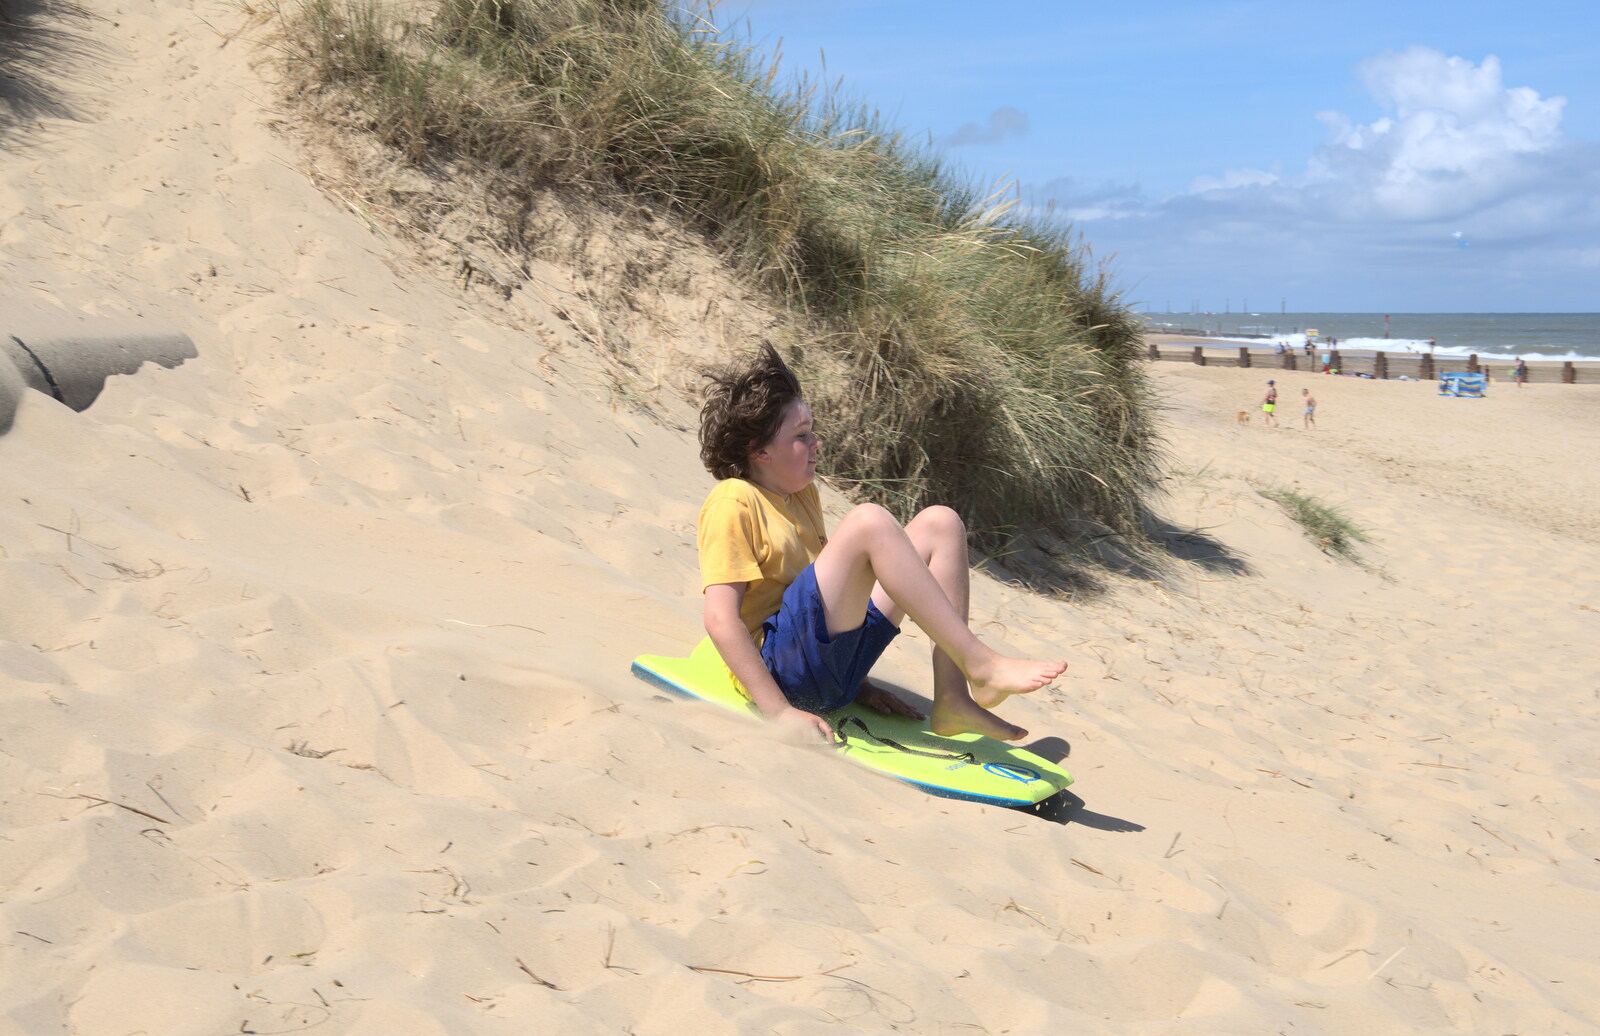 Fred has a go at sand surfing from Camping in the Dunes, Waxham Sands, Norfolk - 9th July 2022